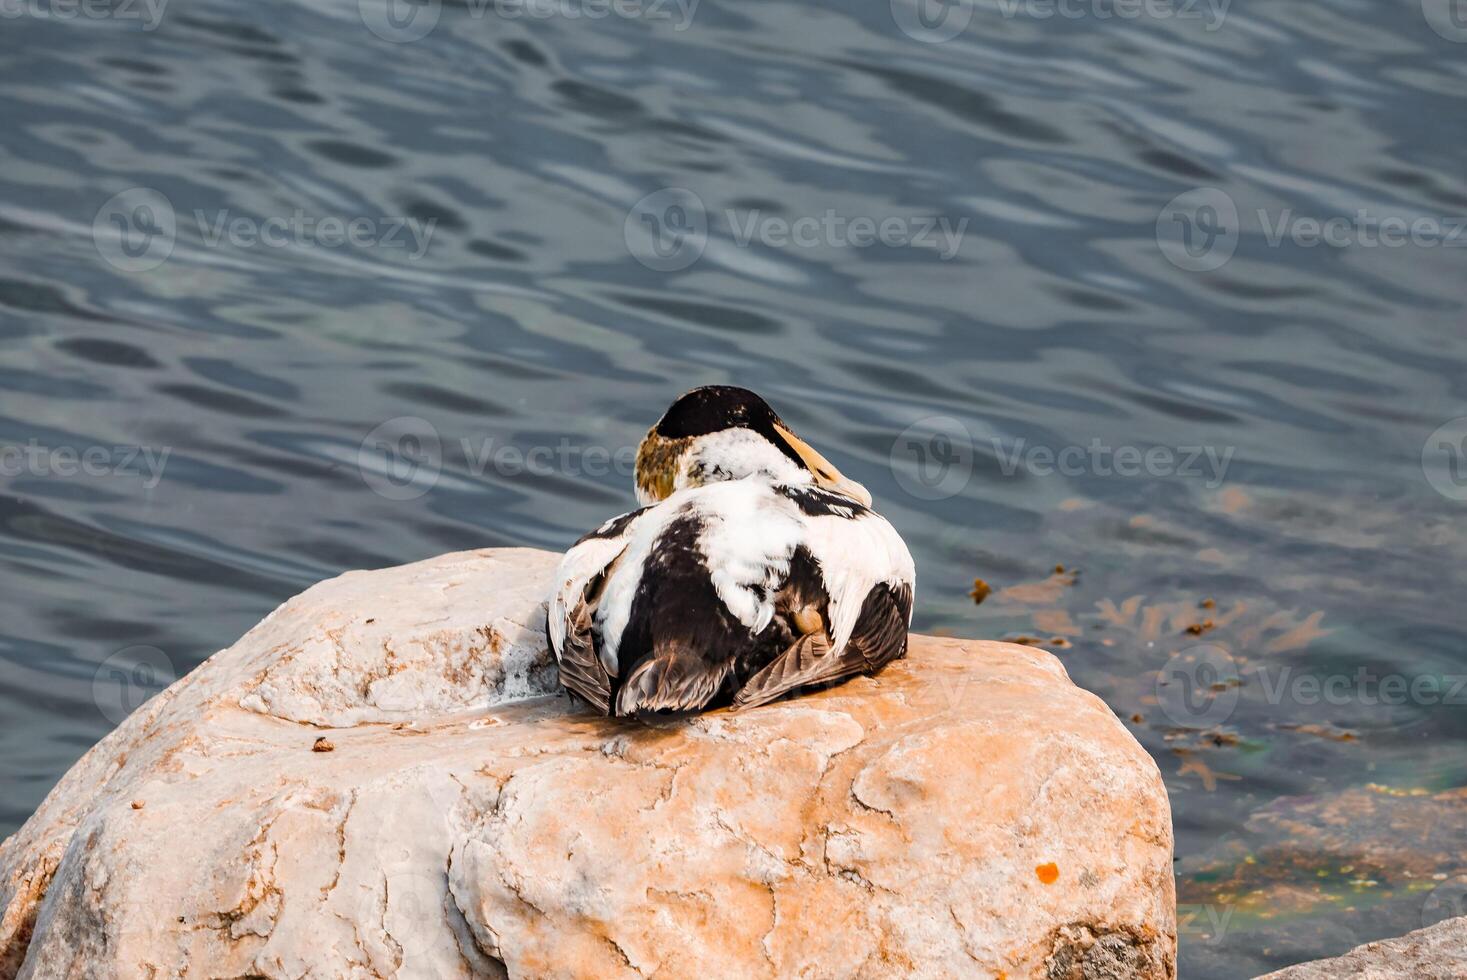 Preening Duck on a Smooth Rock by Calm Waters, Copenhagen or Malmo photo